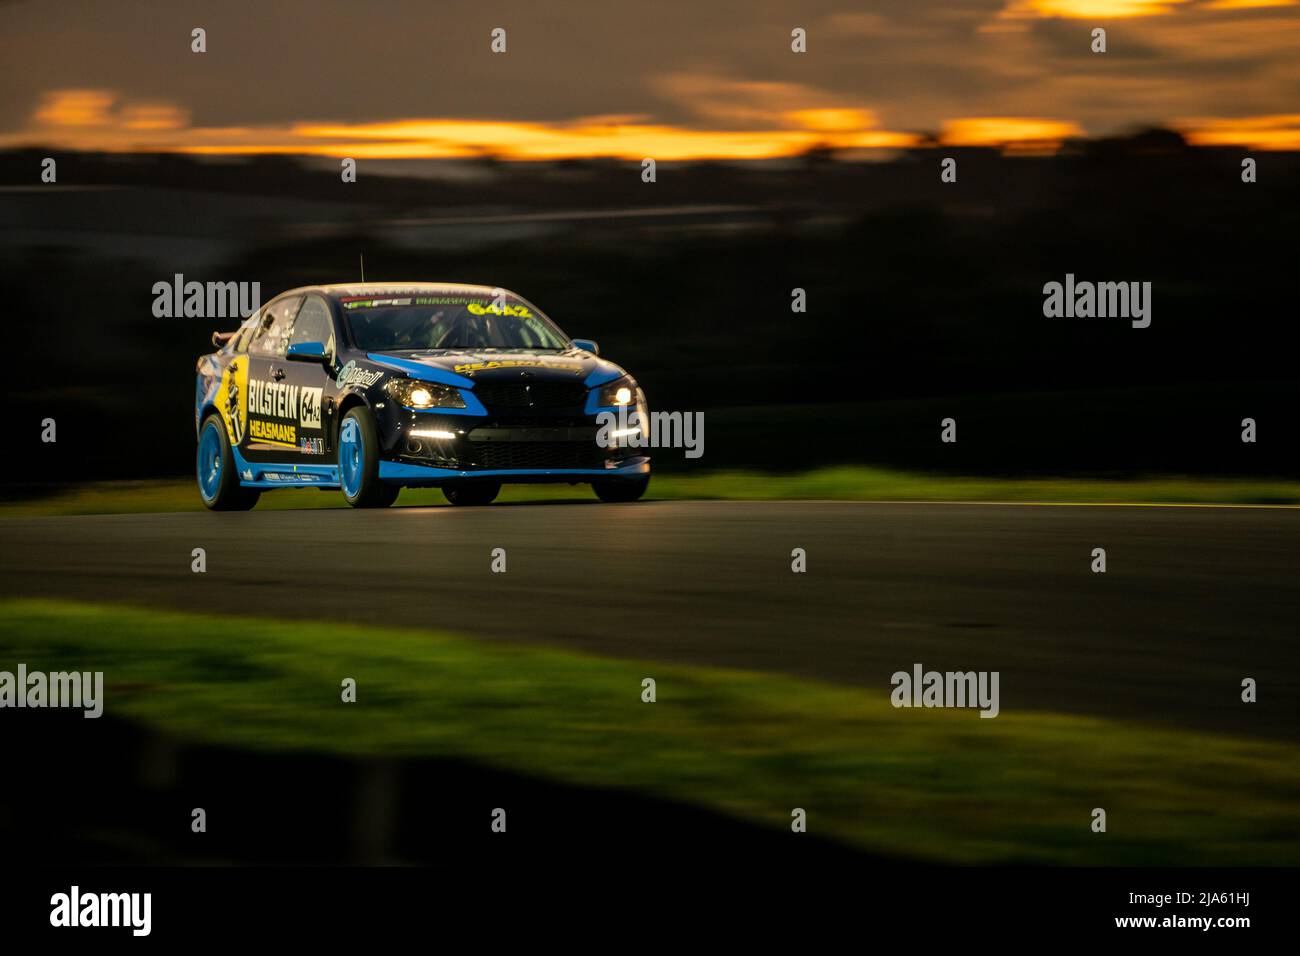 Sydney, Australia. 27 May, 2022. Chris Lillis piloting his Cachet Homes 2019 HSV Clubsport through turn 3 at Sydney Motorsport Park as the sun sets. Credit: James Forrester / Alamy Live News. Stock Photo